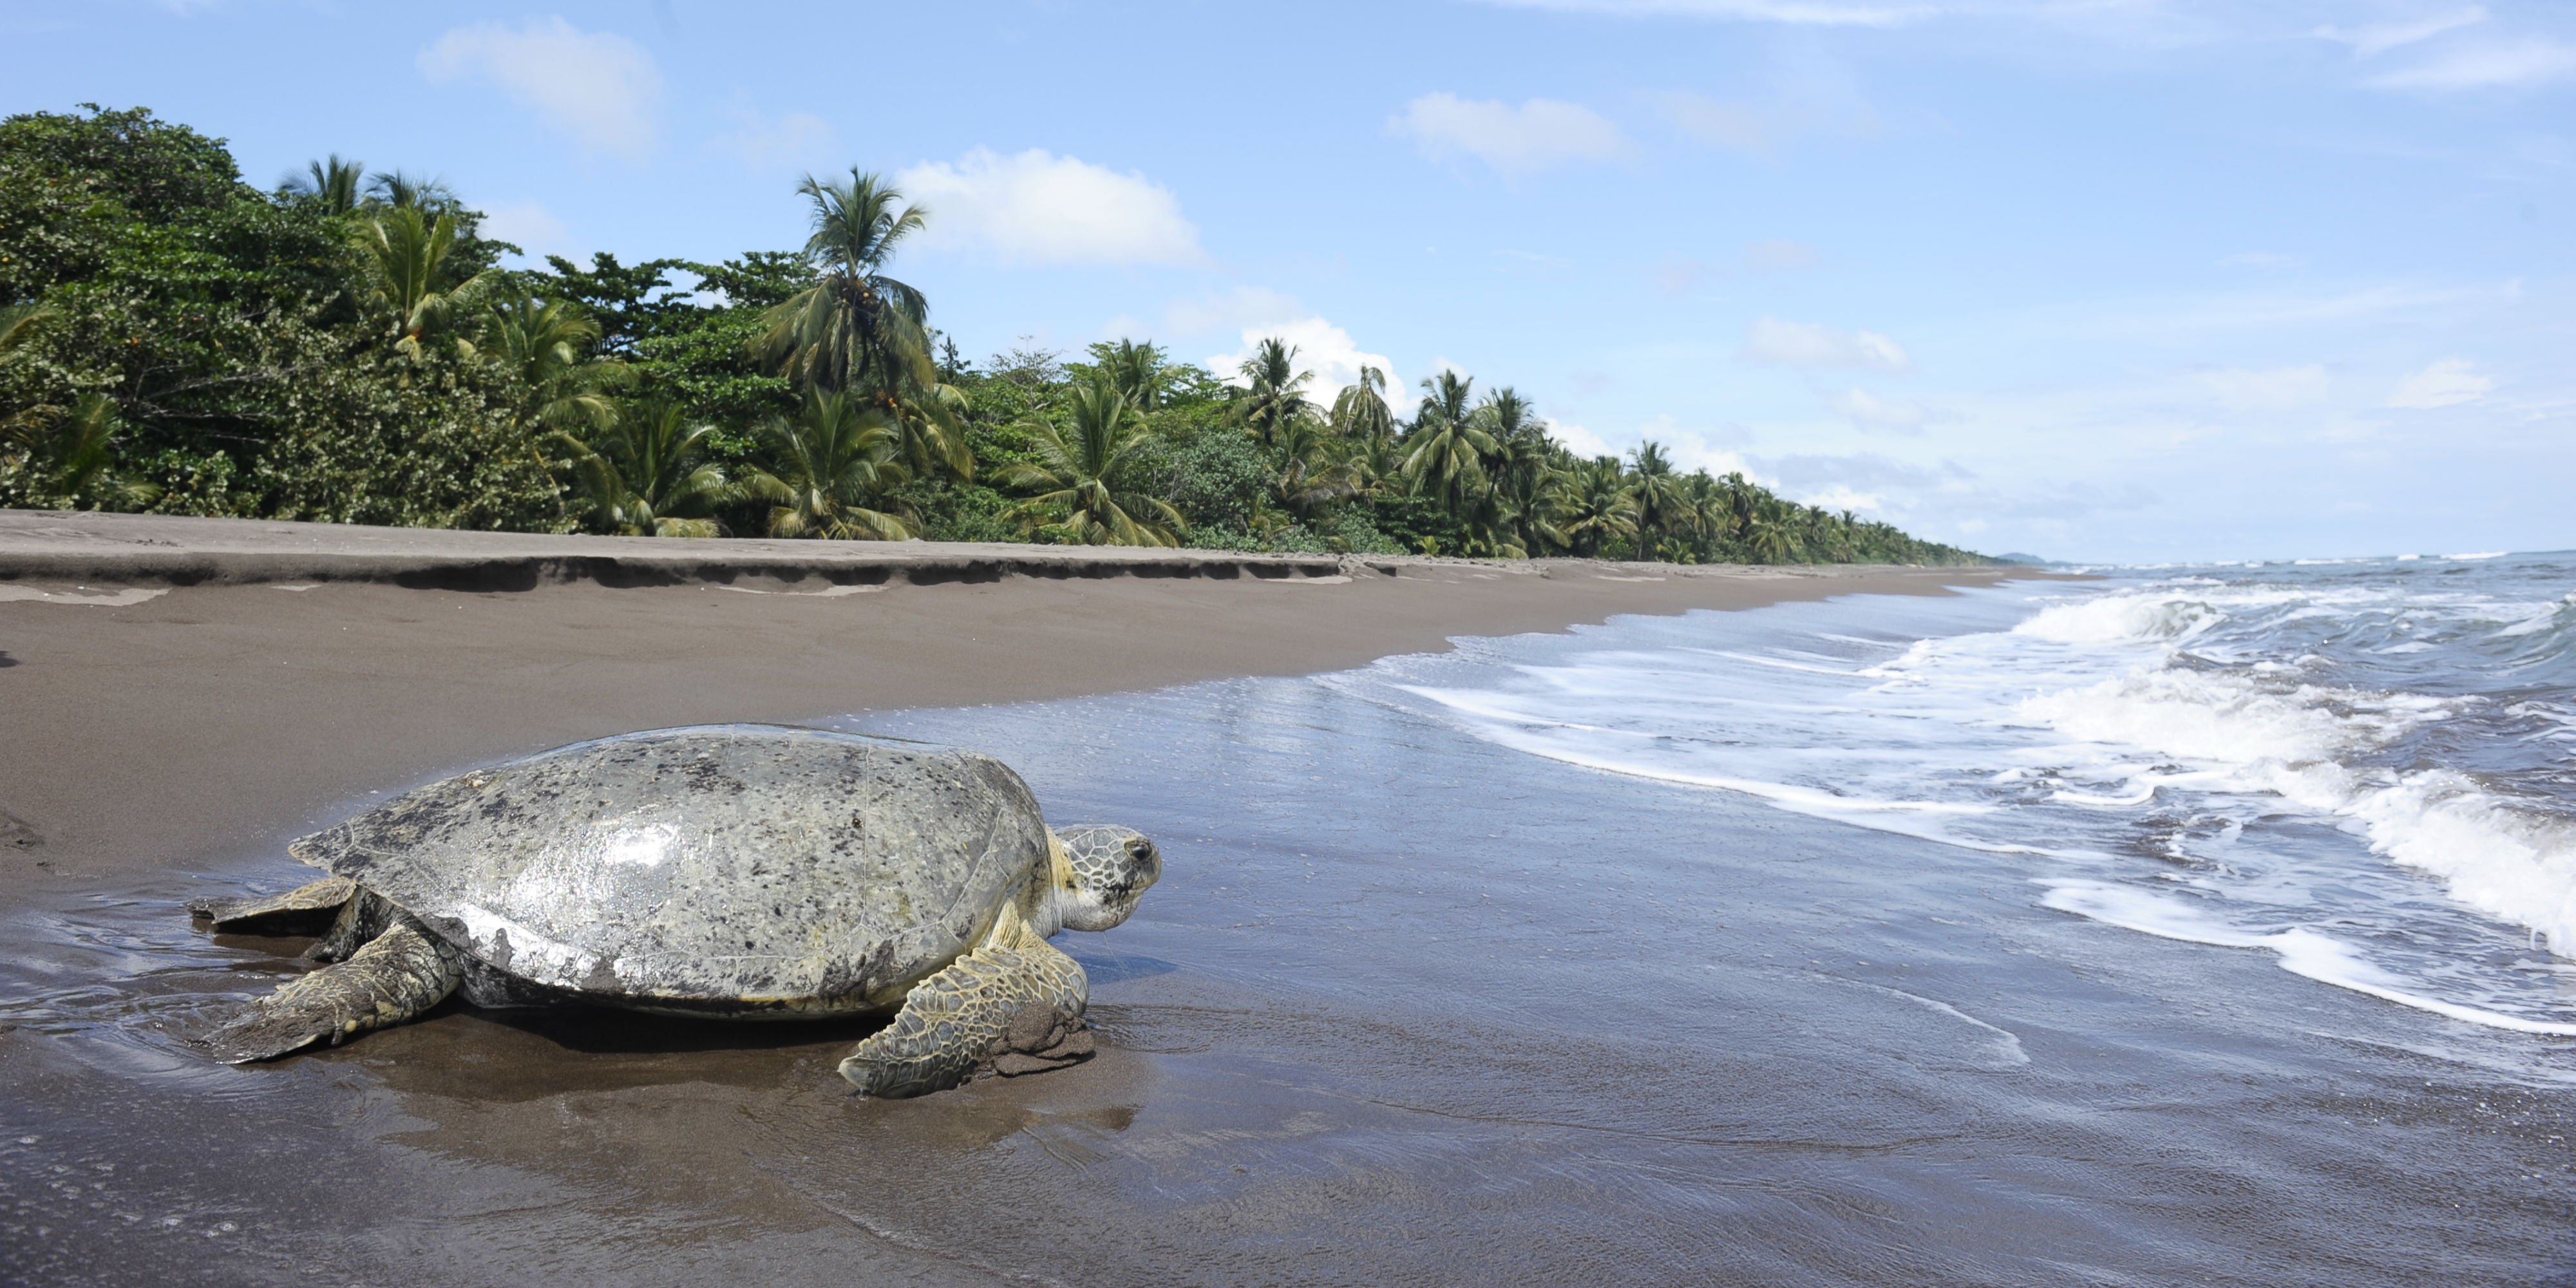 The endangered green sea turtle makes its way back to the ocean on a beach in Costa Rica.